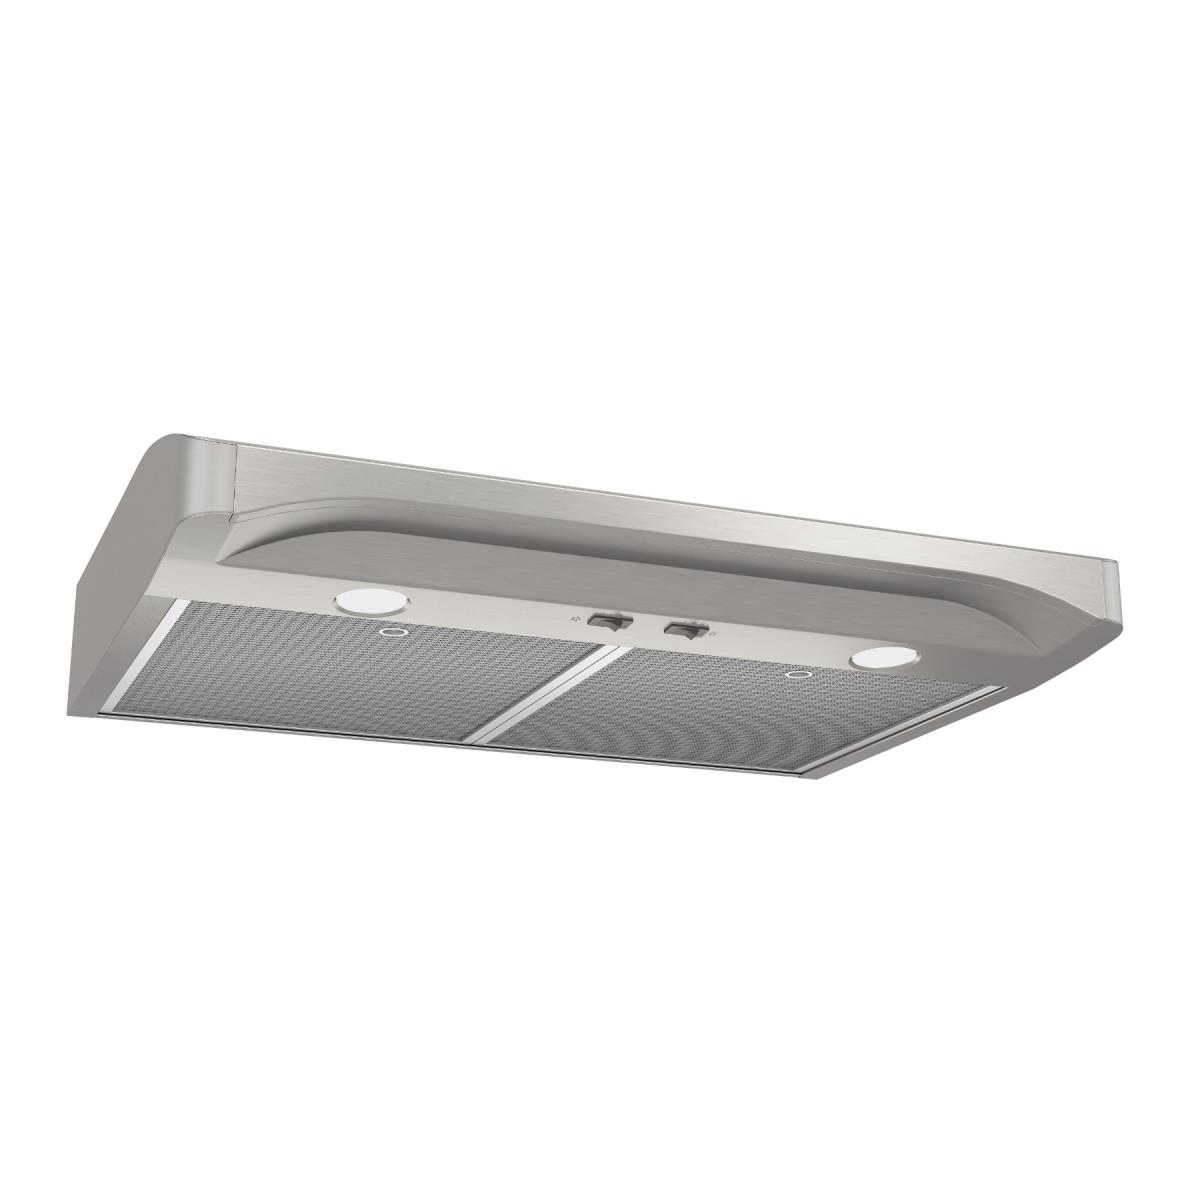 Picture of Broan ALT130SS 30 in. Elite Convertible Under-Cabinet Range Hood, Stainless Steel